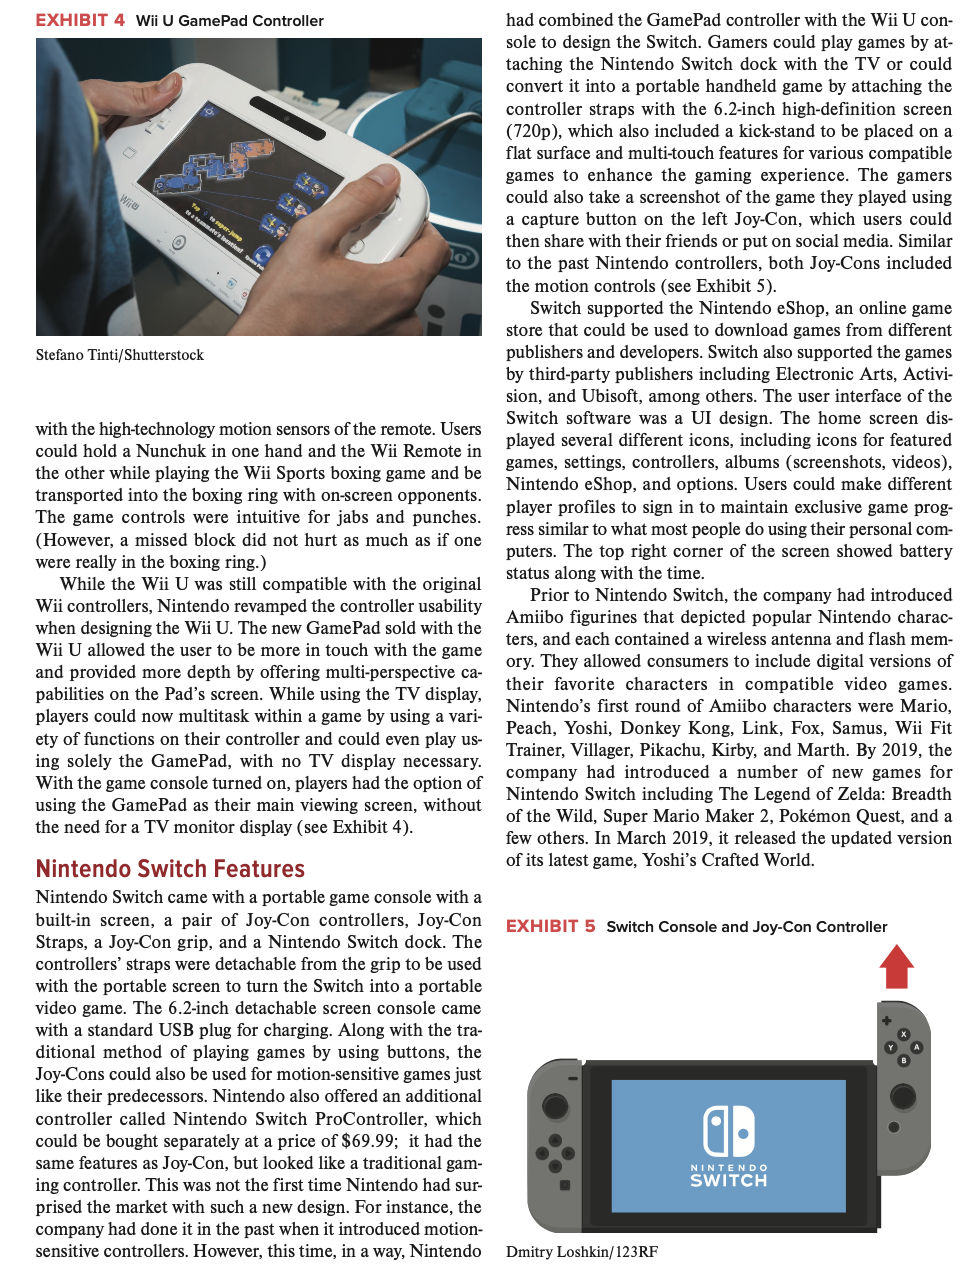 Nintendo: Wii U GamePad Is The Only Real Innovation This Console Cycle, But  We Didn't Showcase It Well Enough